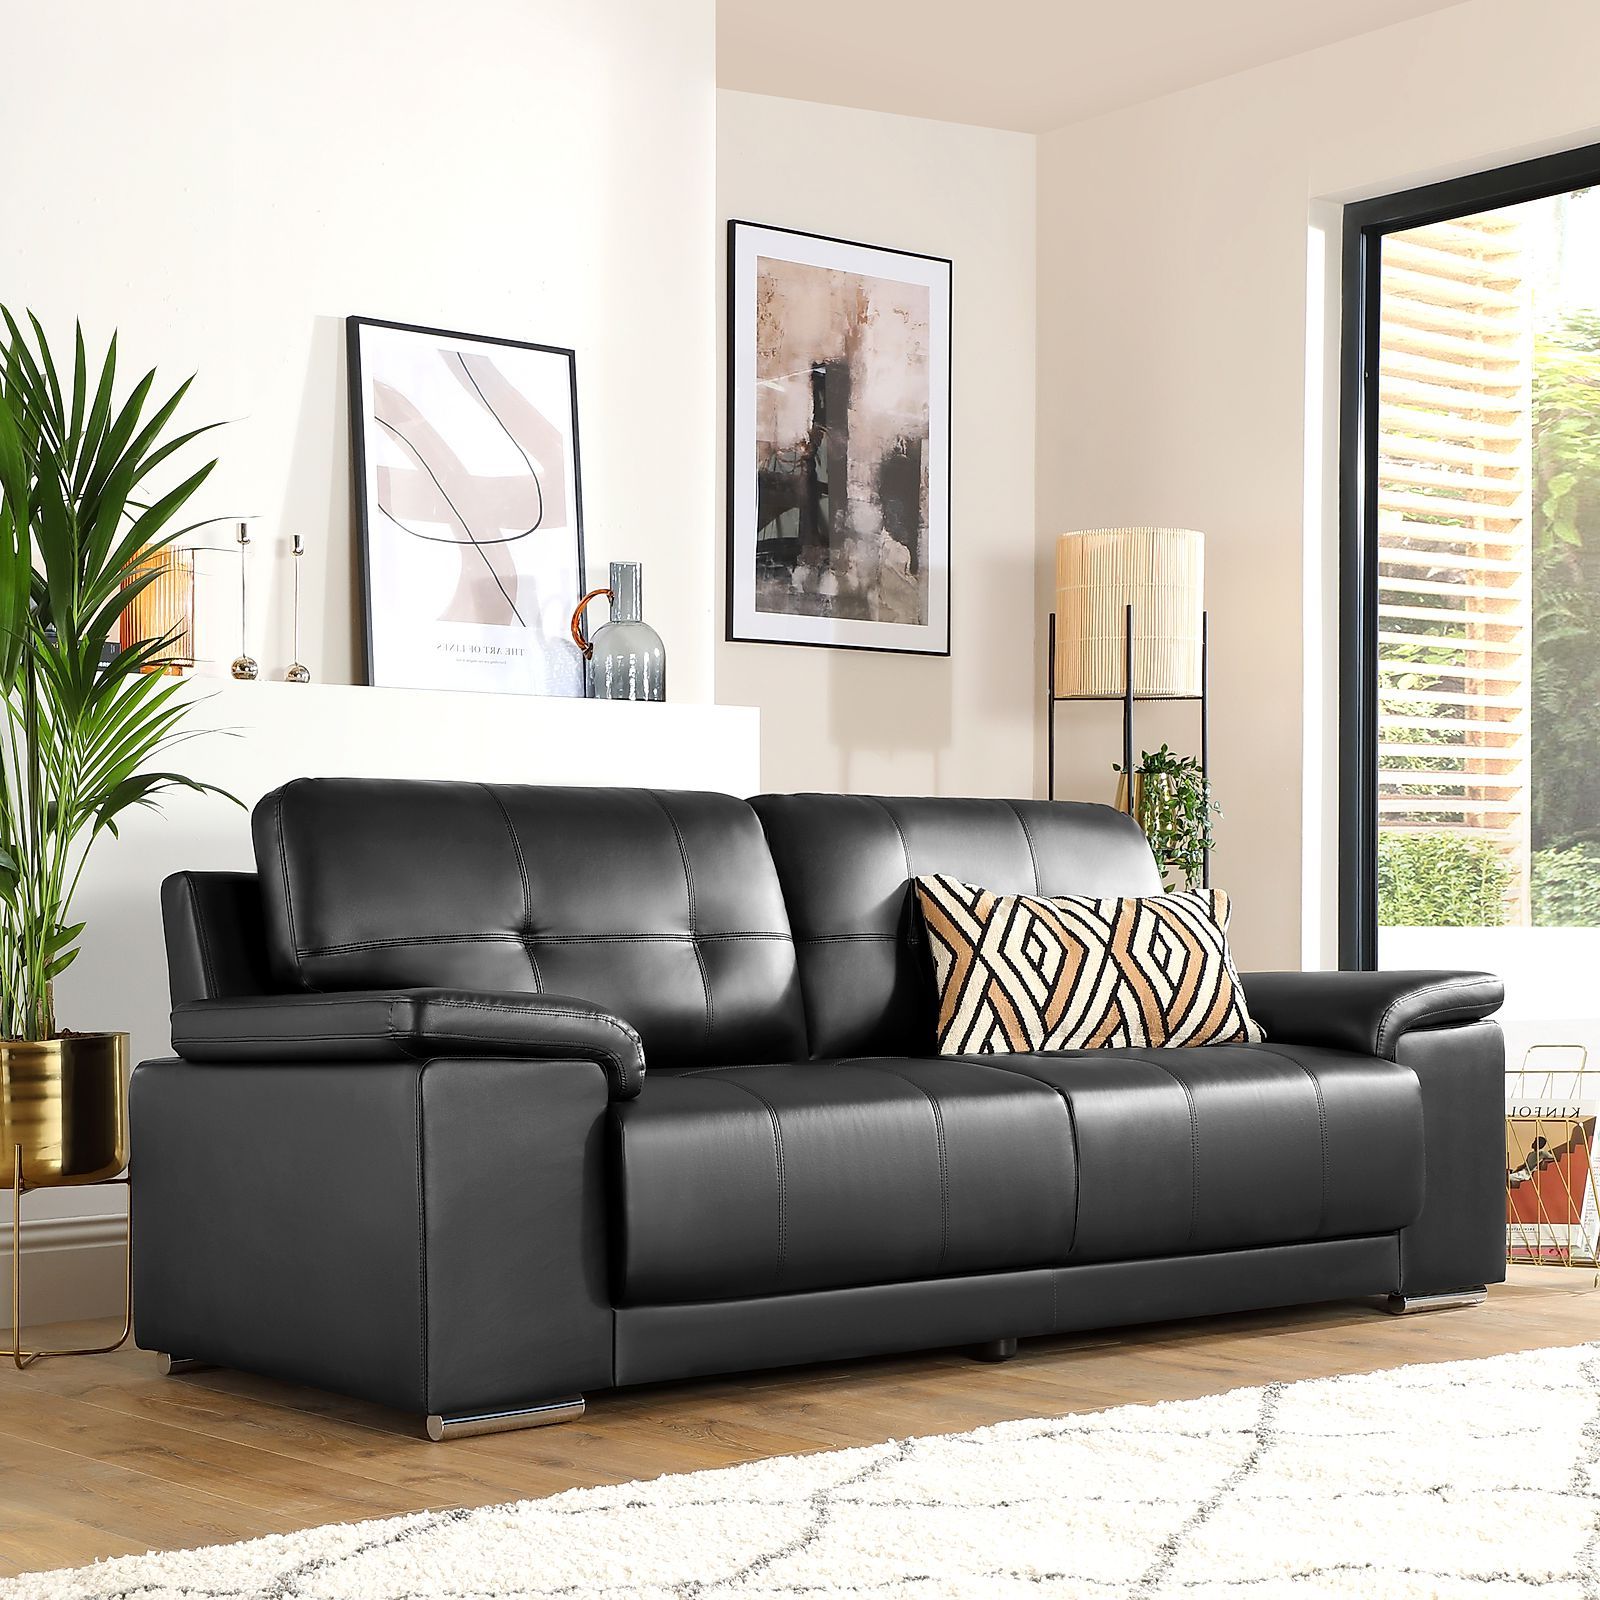 Furniture Choice Pertaining To Sofas In Black (View 3 of 15)